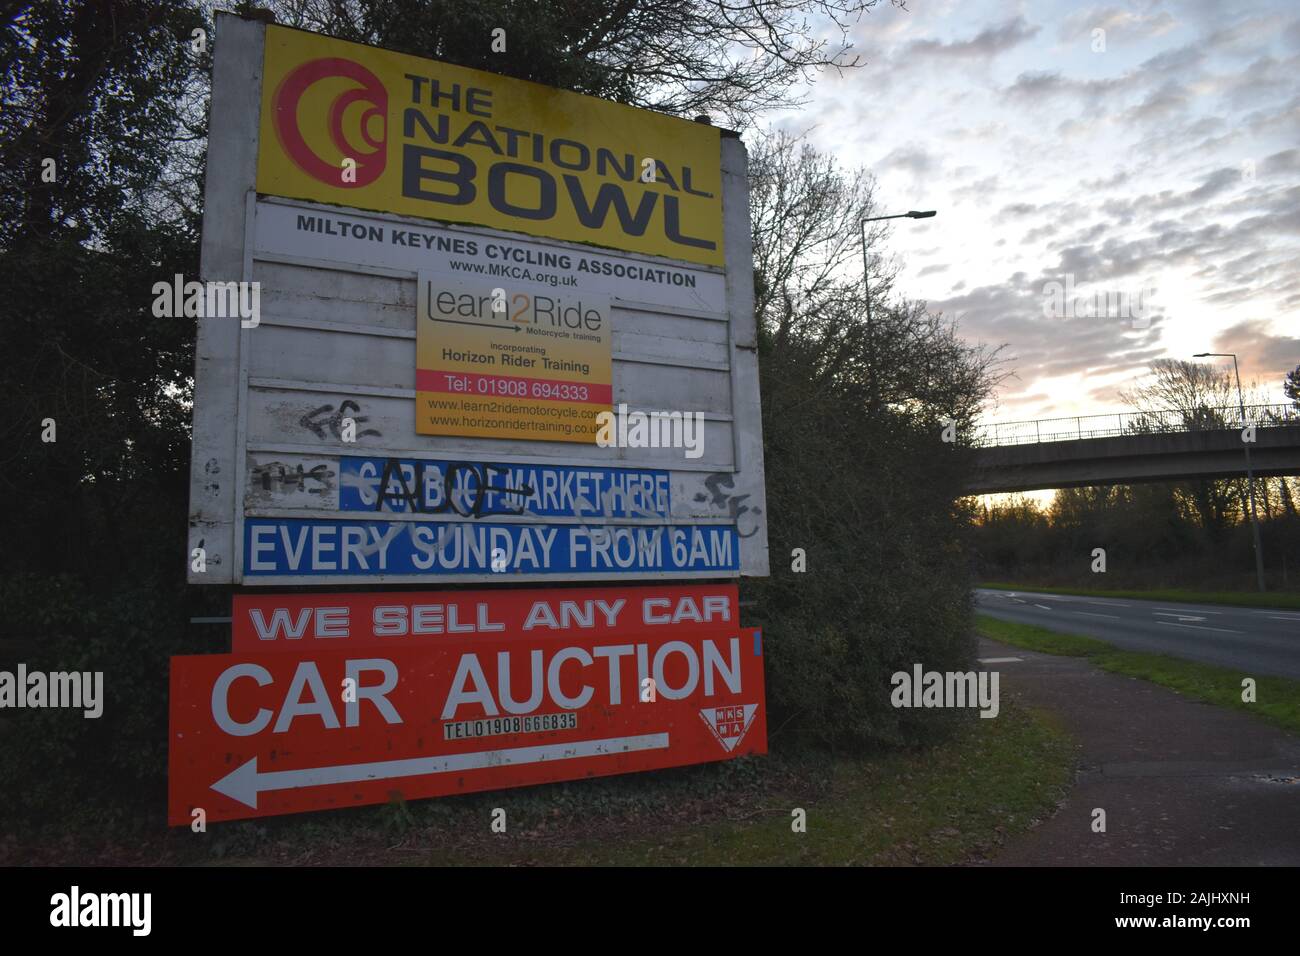 Sign at the entrance to the National Bowl, Milton Keynes Stock Photo